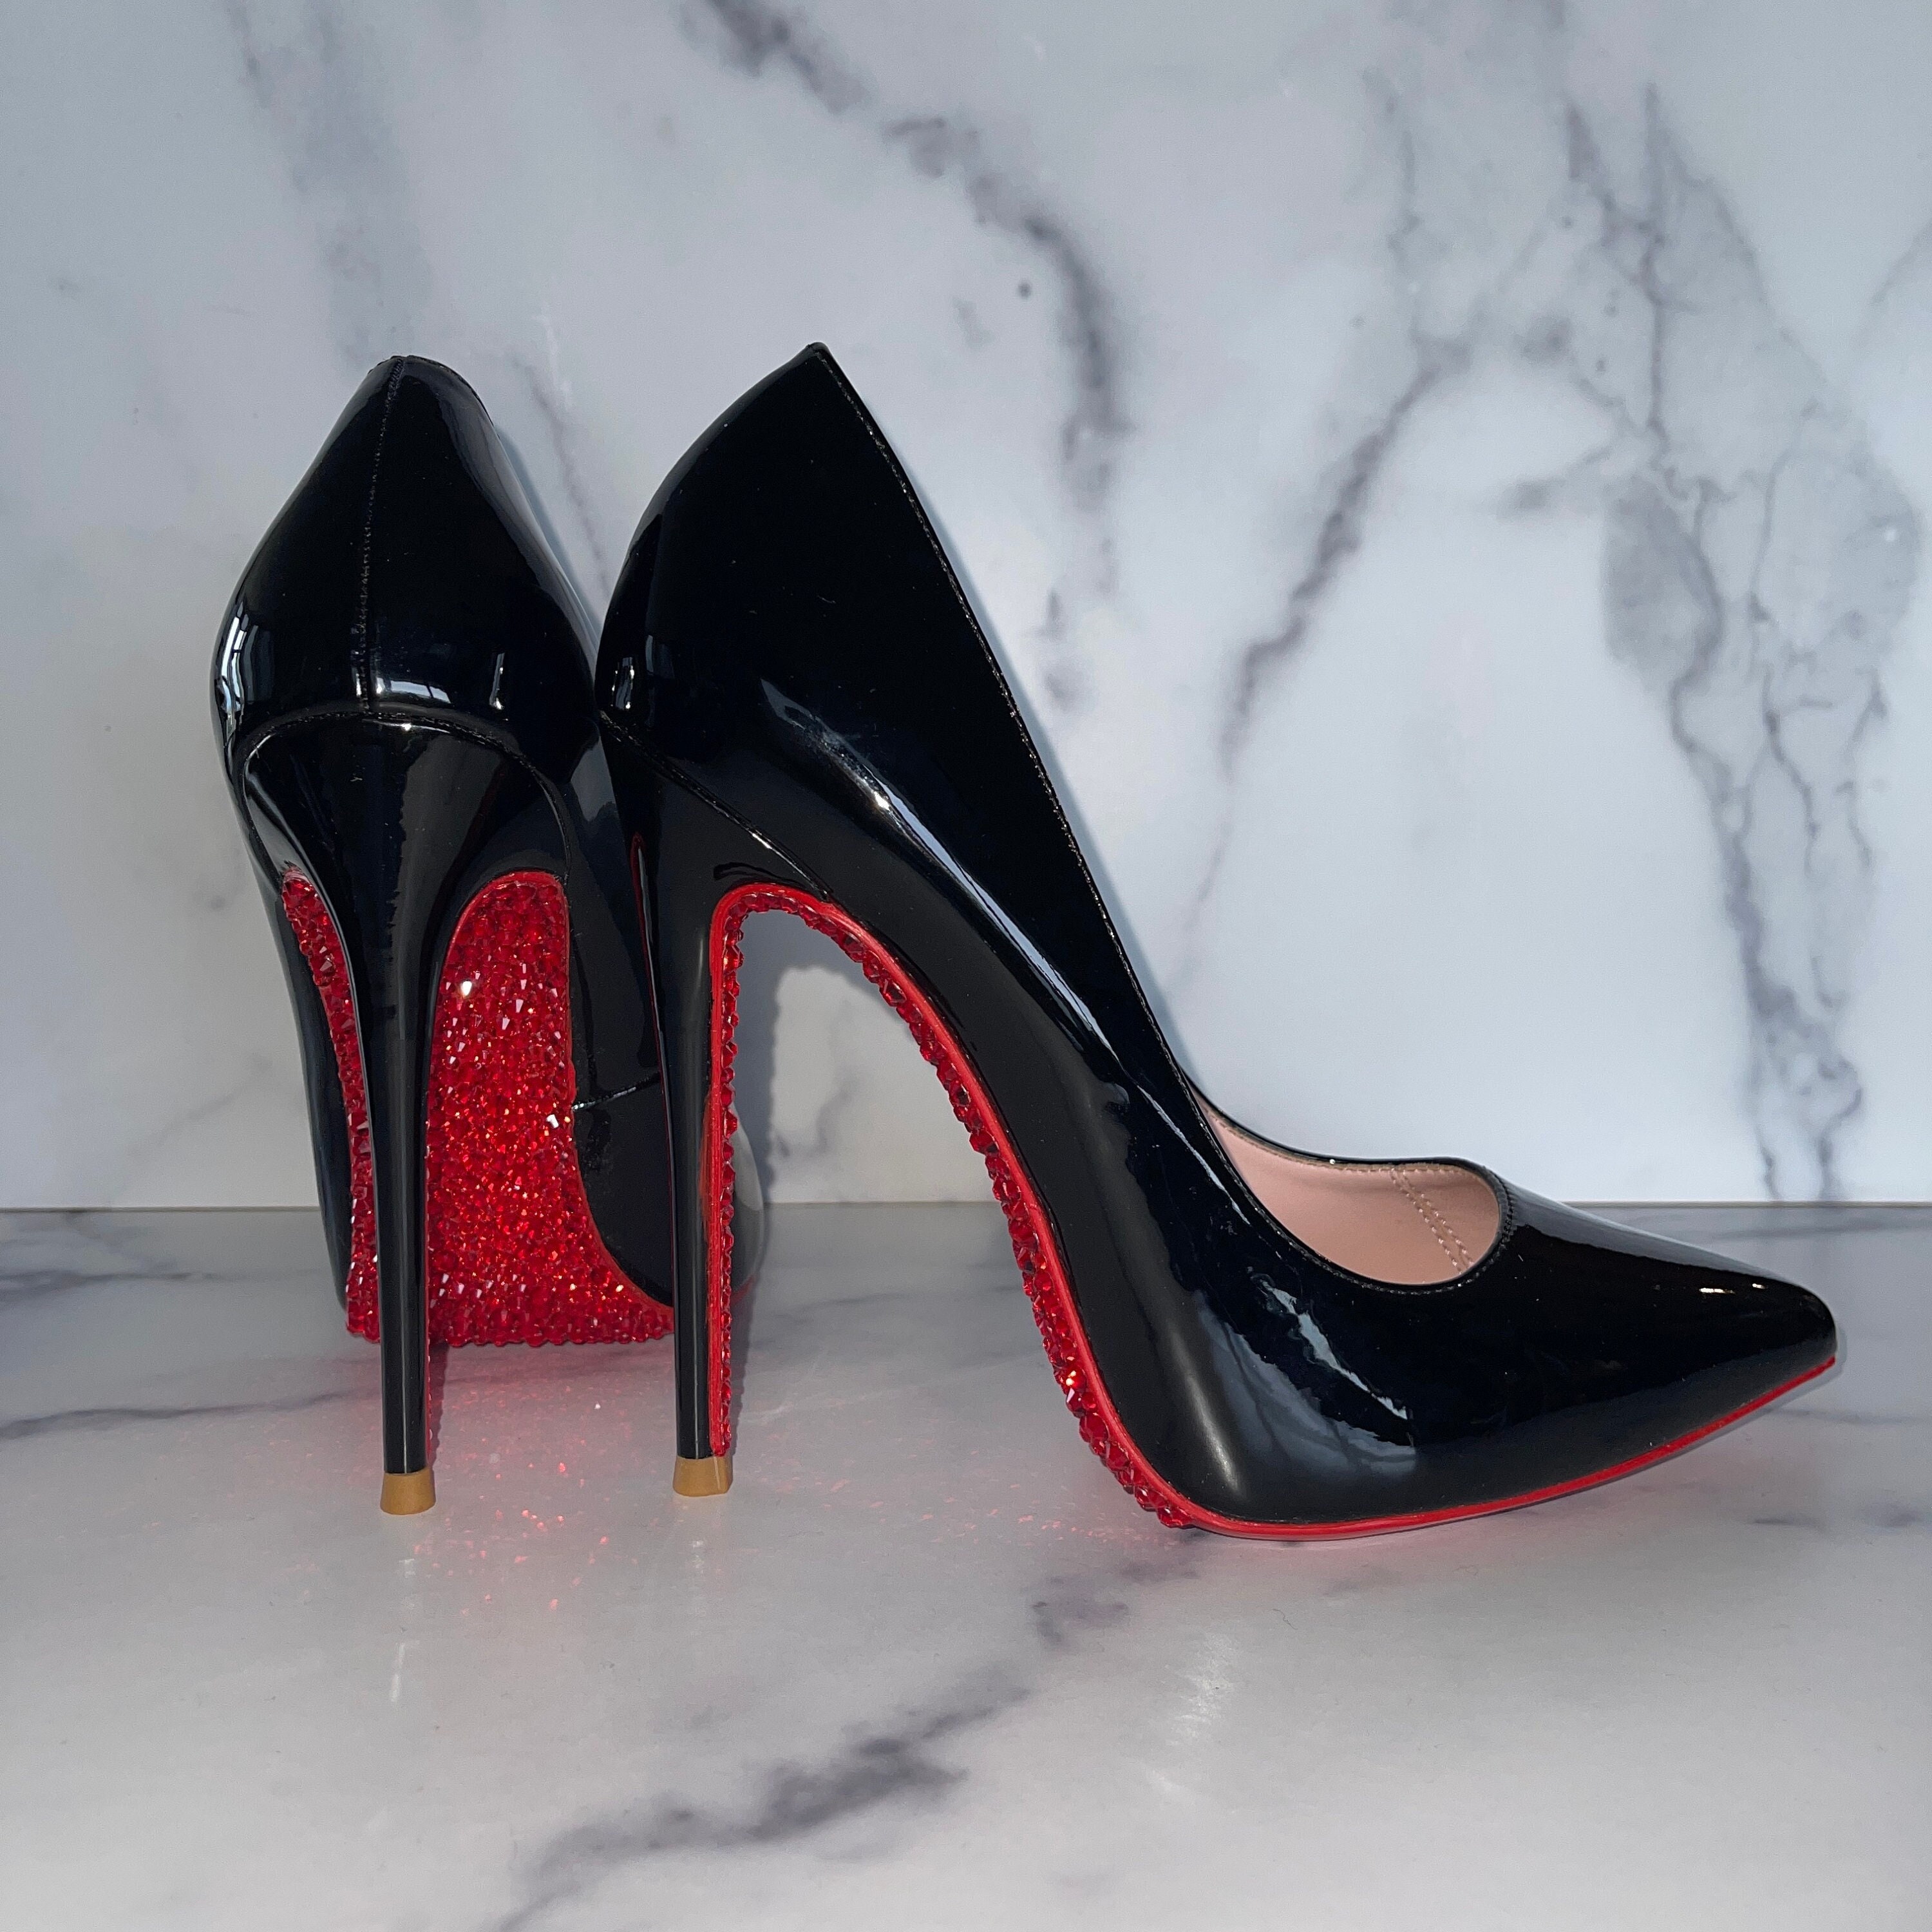 The Newest Red Carpet Shoe Trend Is Actually Classic Pointy Black Pumps |  Glamour